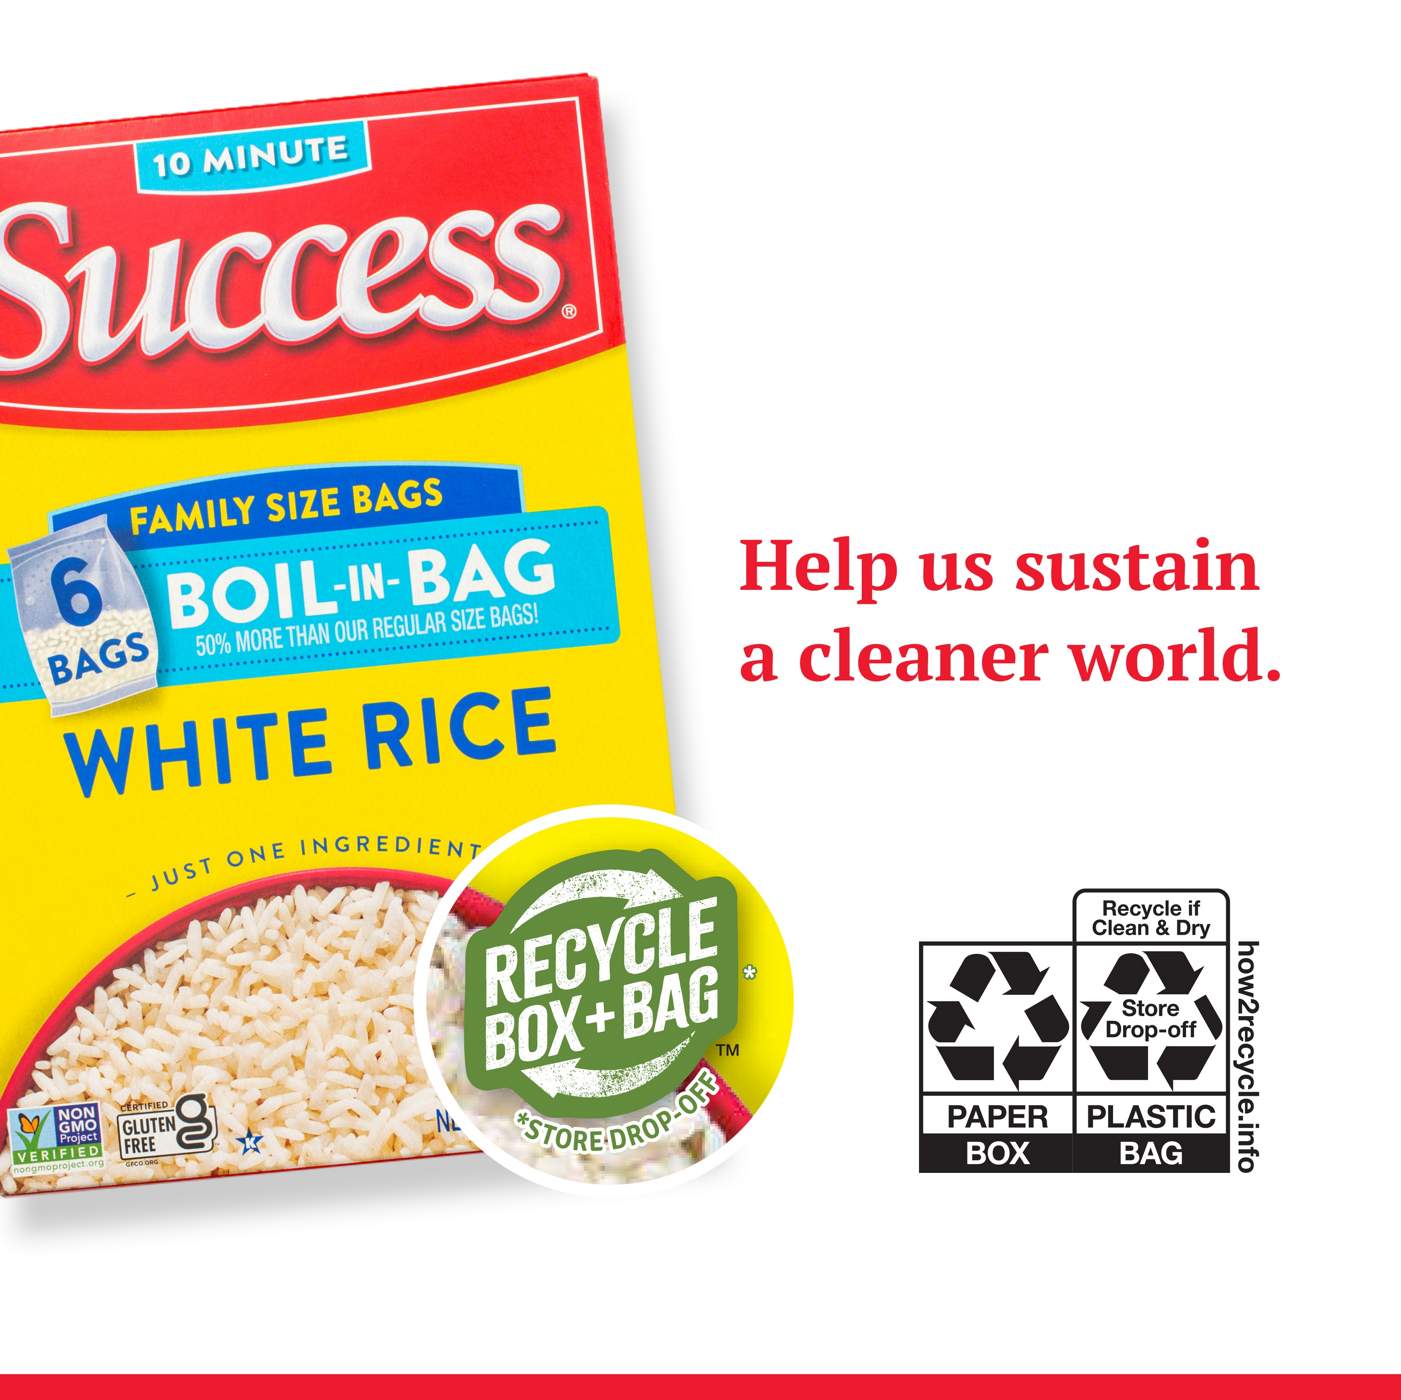 Success Boil-in-Bag White Rice Family Size Bags; image 5 of 7